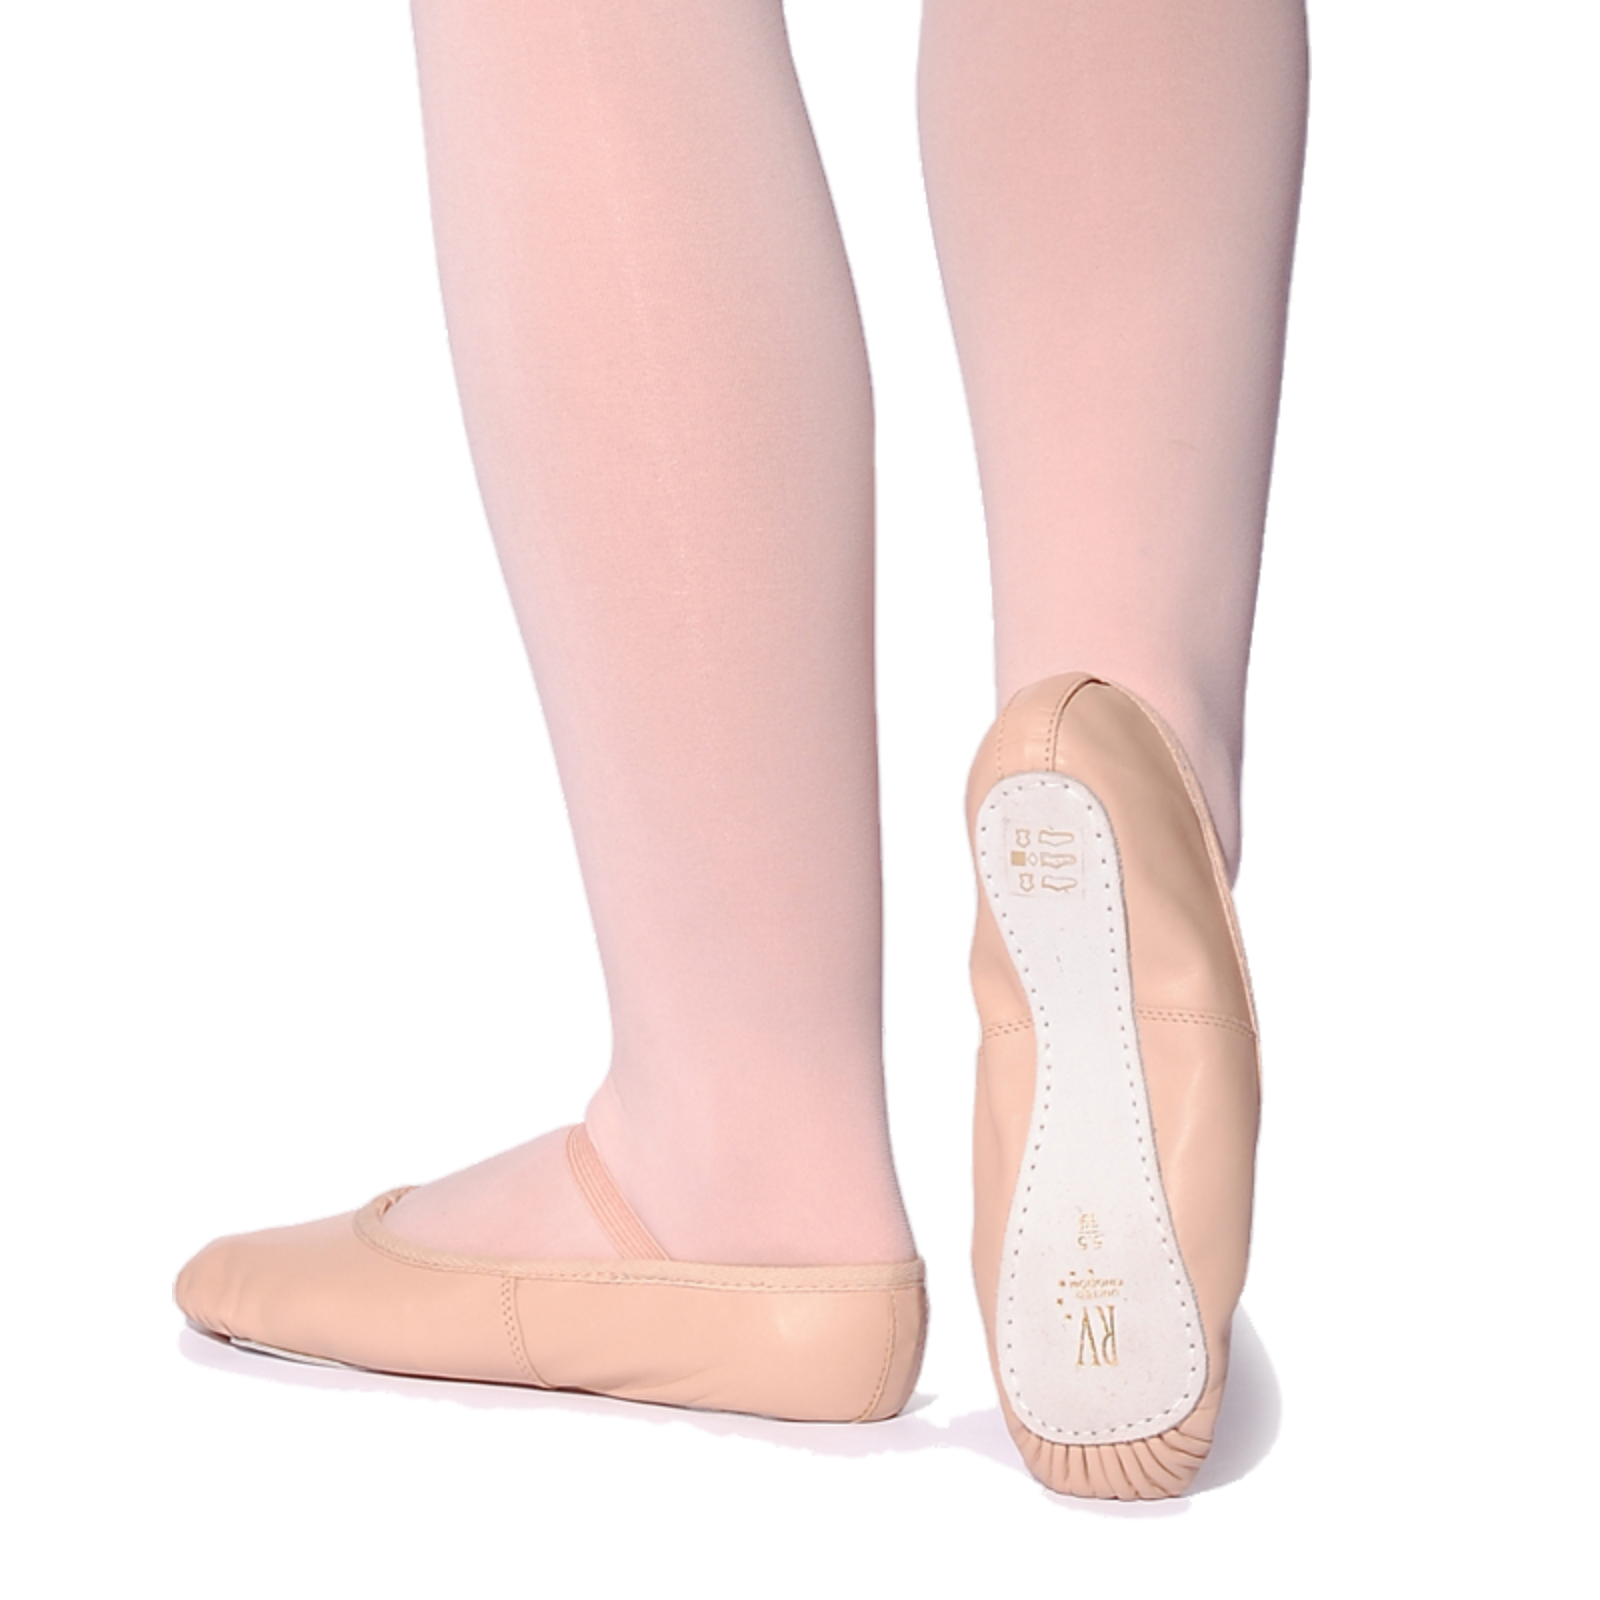 PINK LEATHER OPHELIA BALLET SHOES